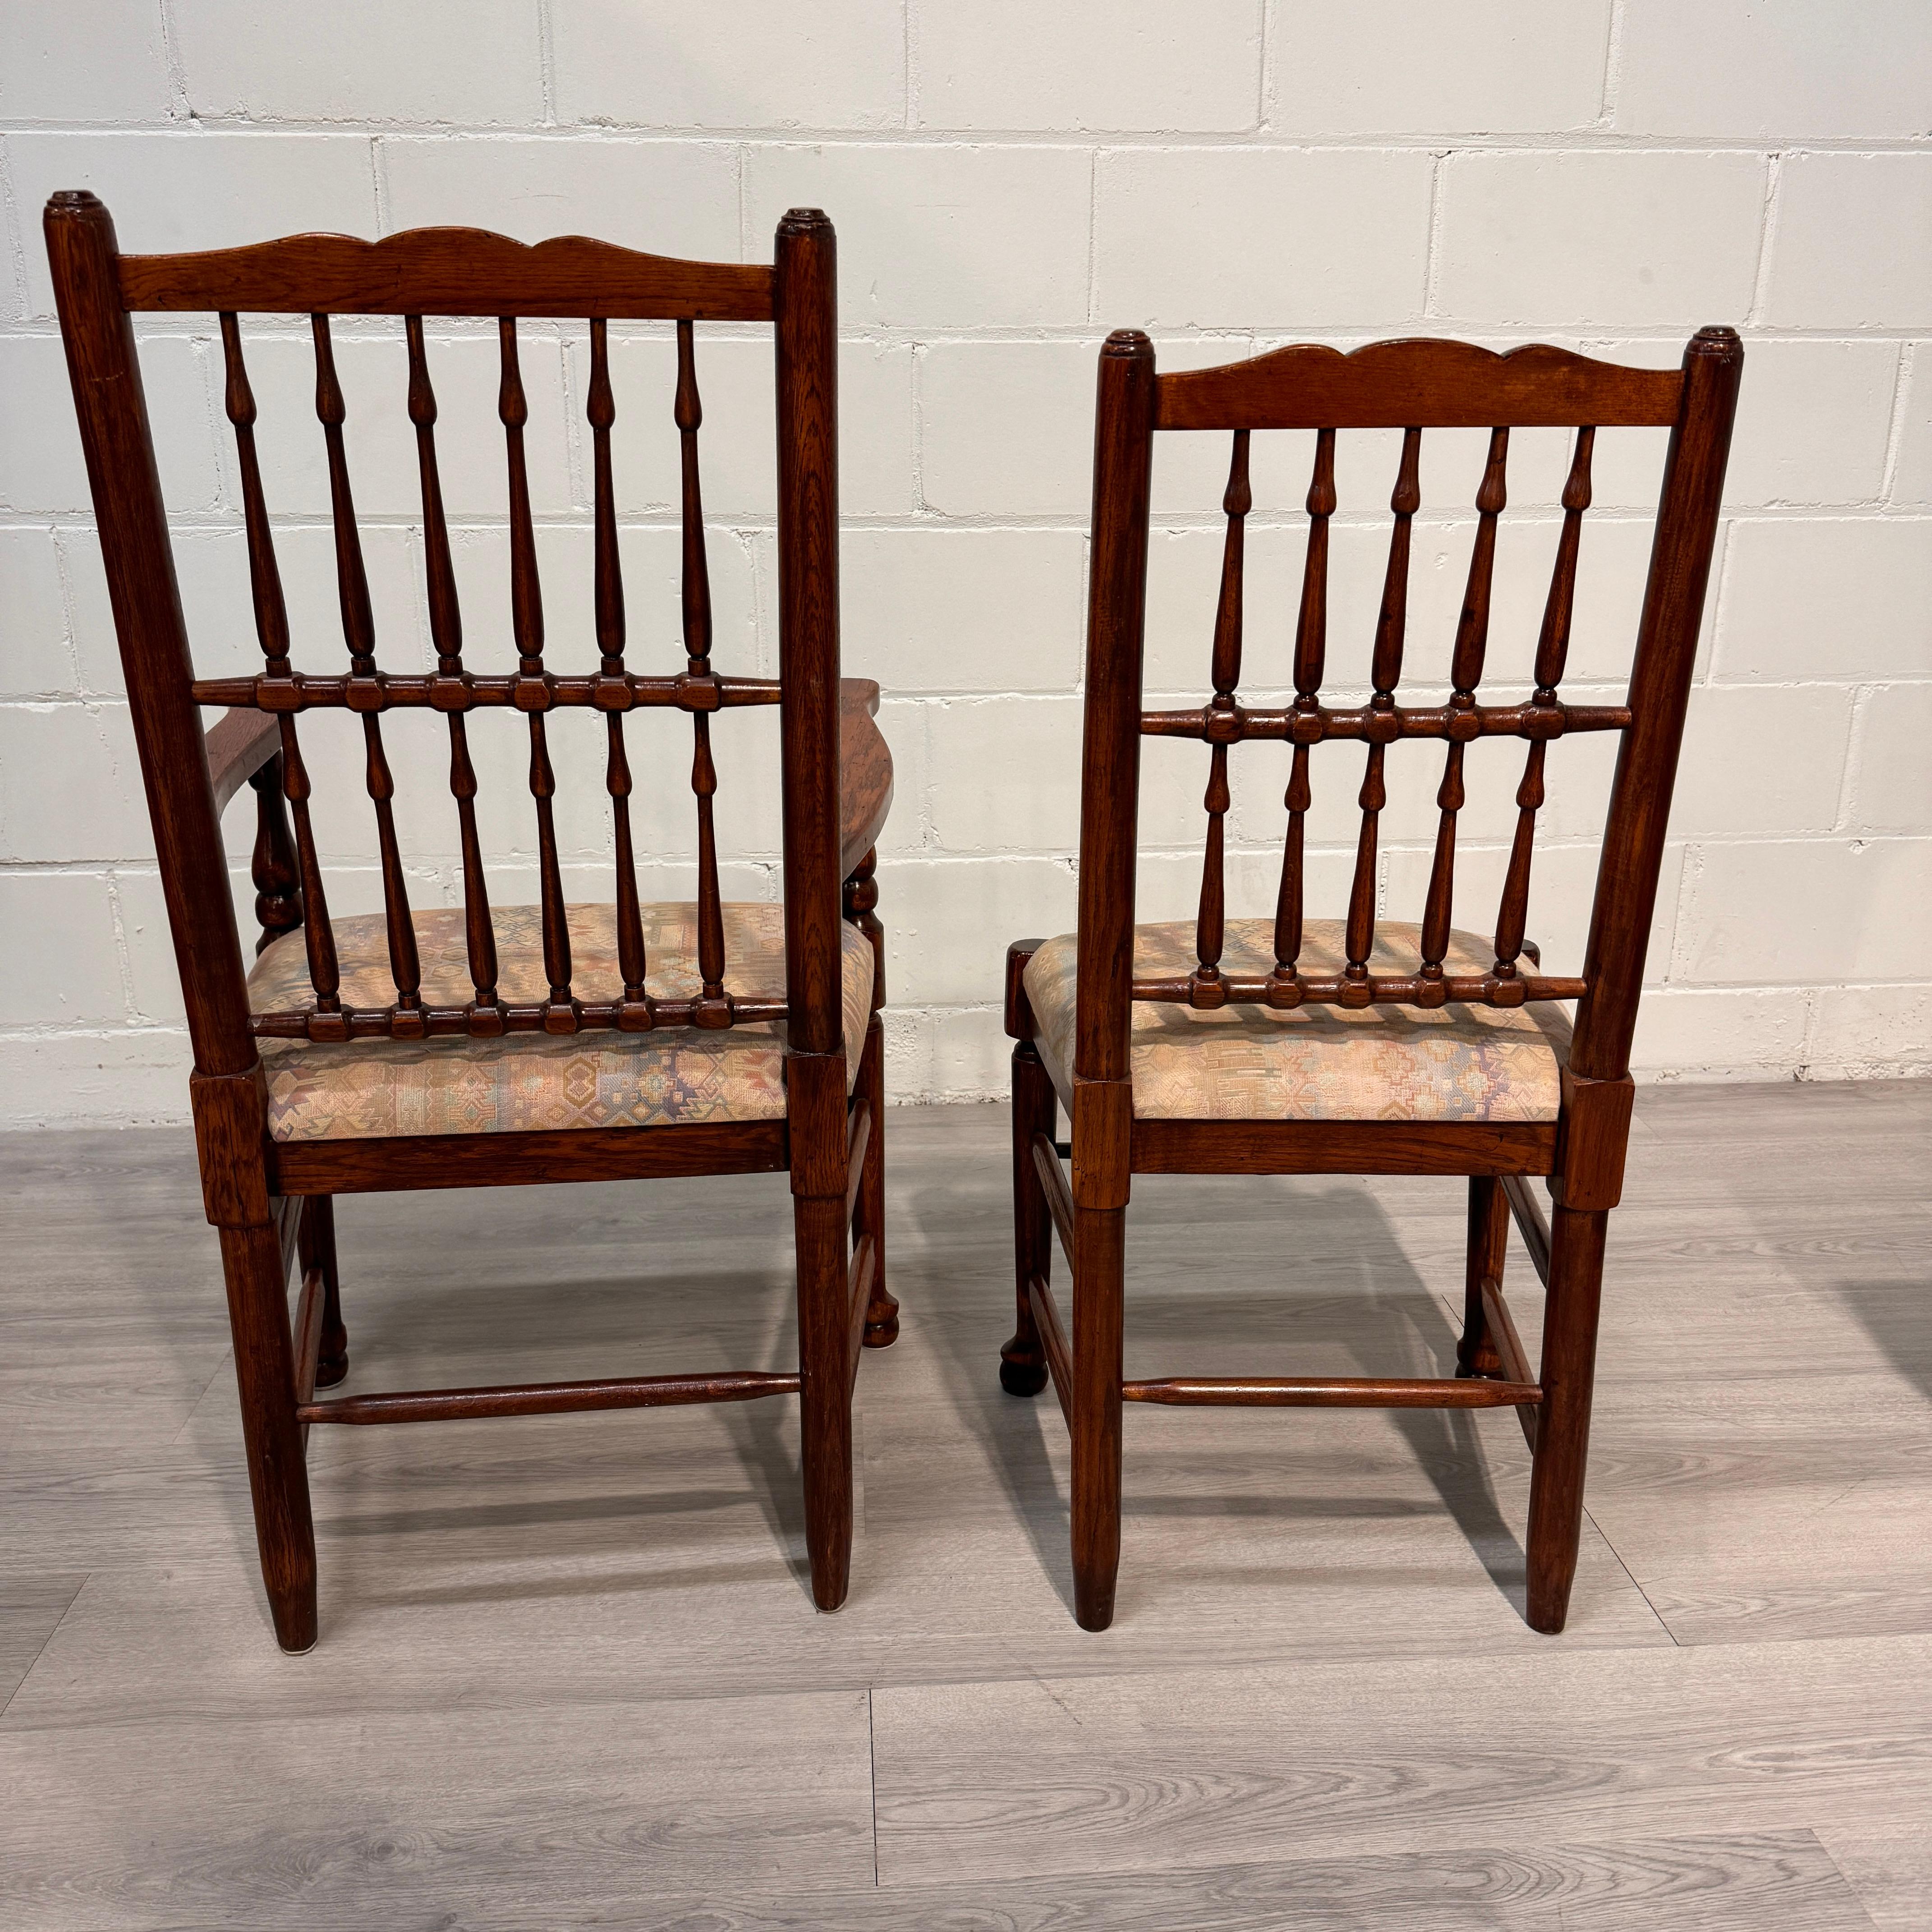 20th Century English Solid Oak Spindle Back Dining Chairs Set of 8 For Sale